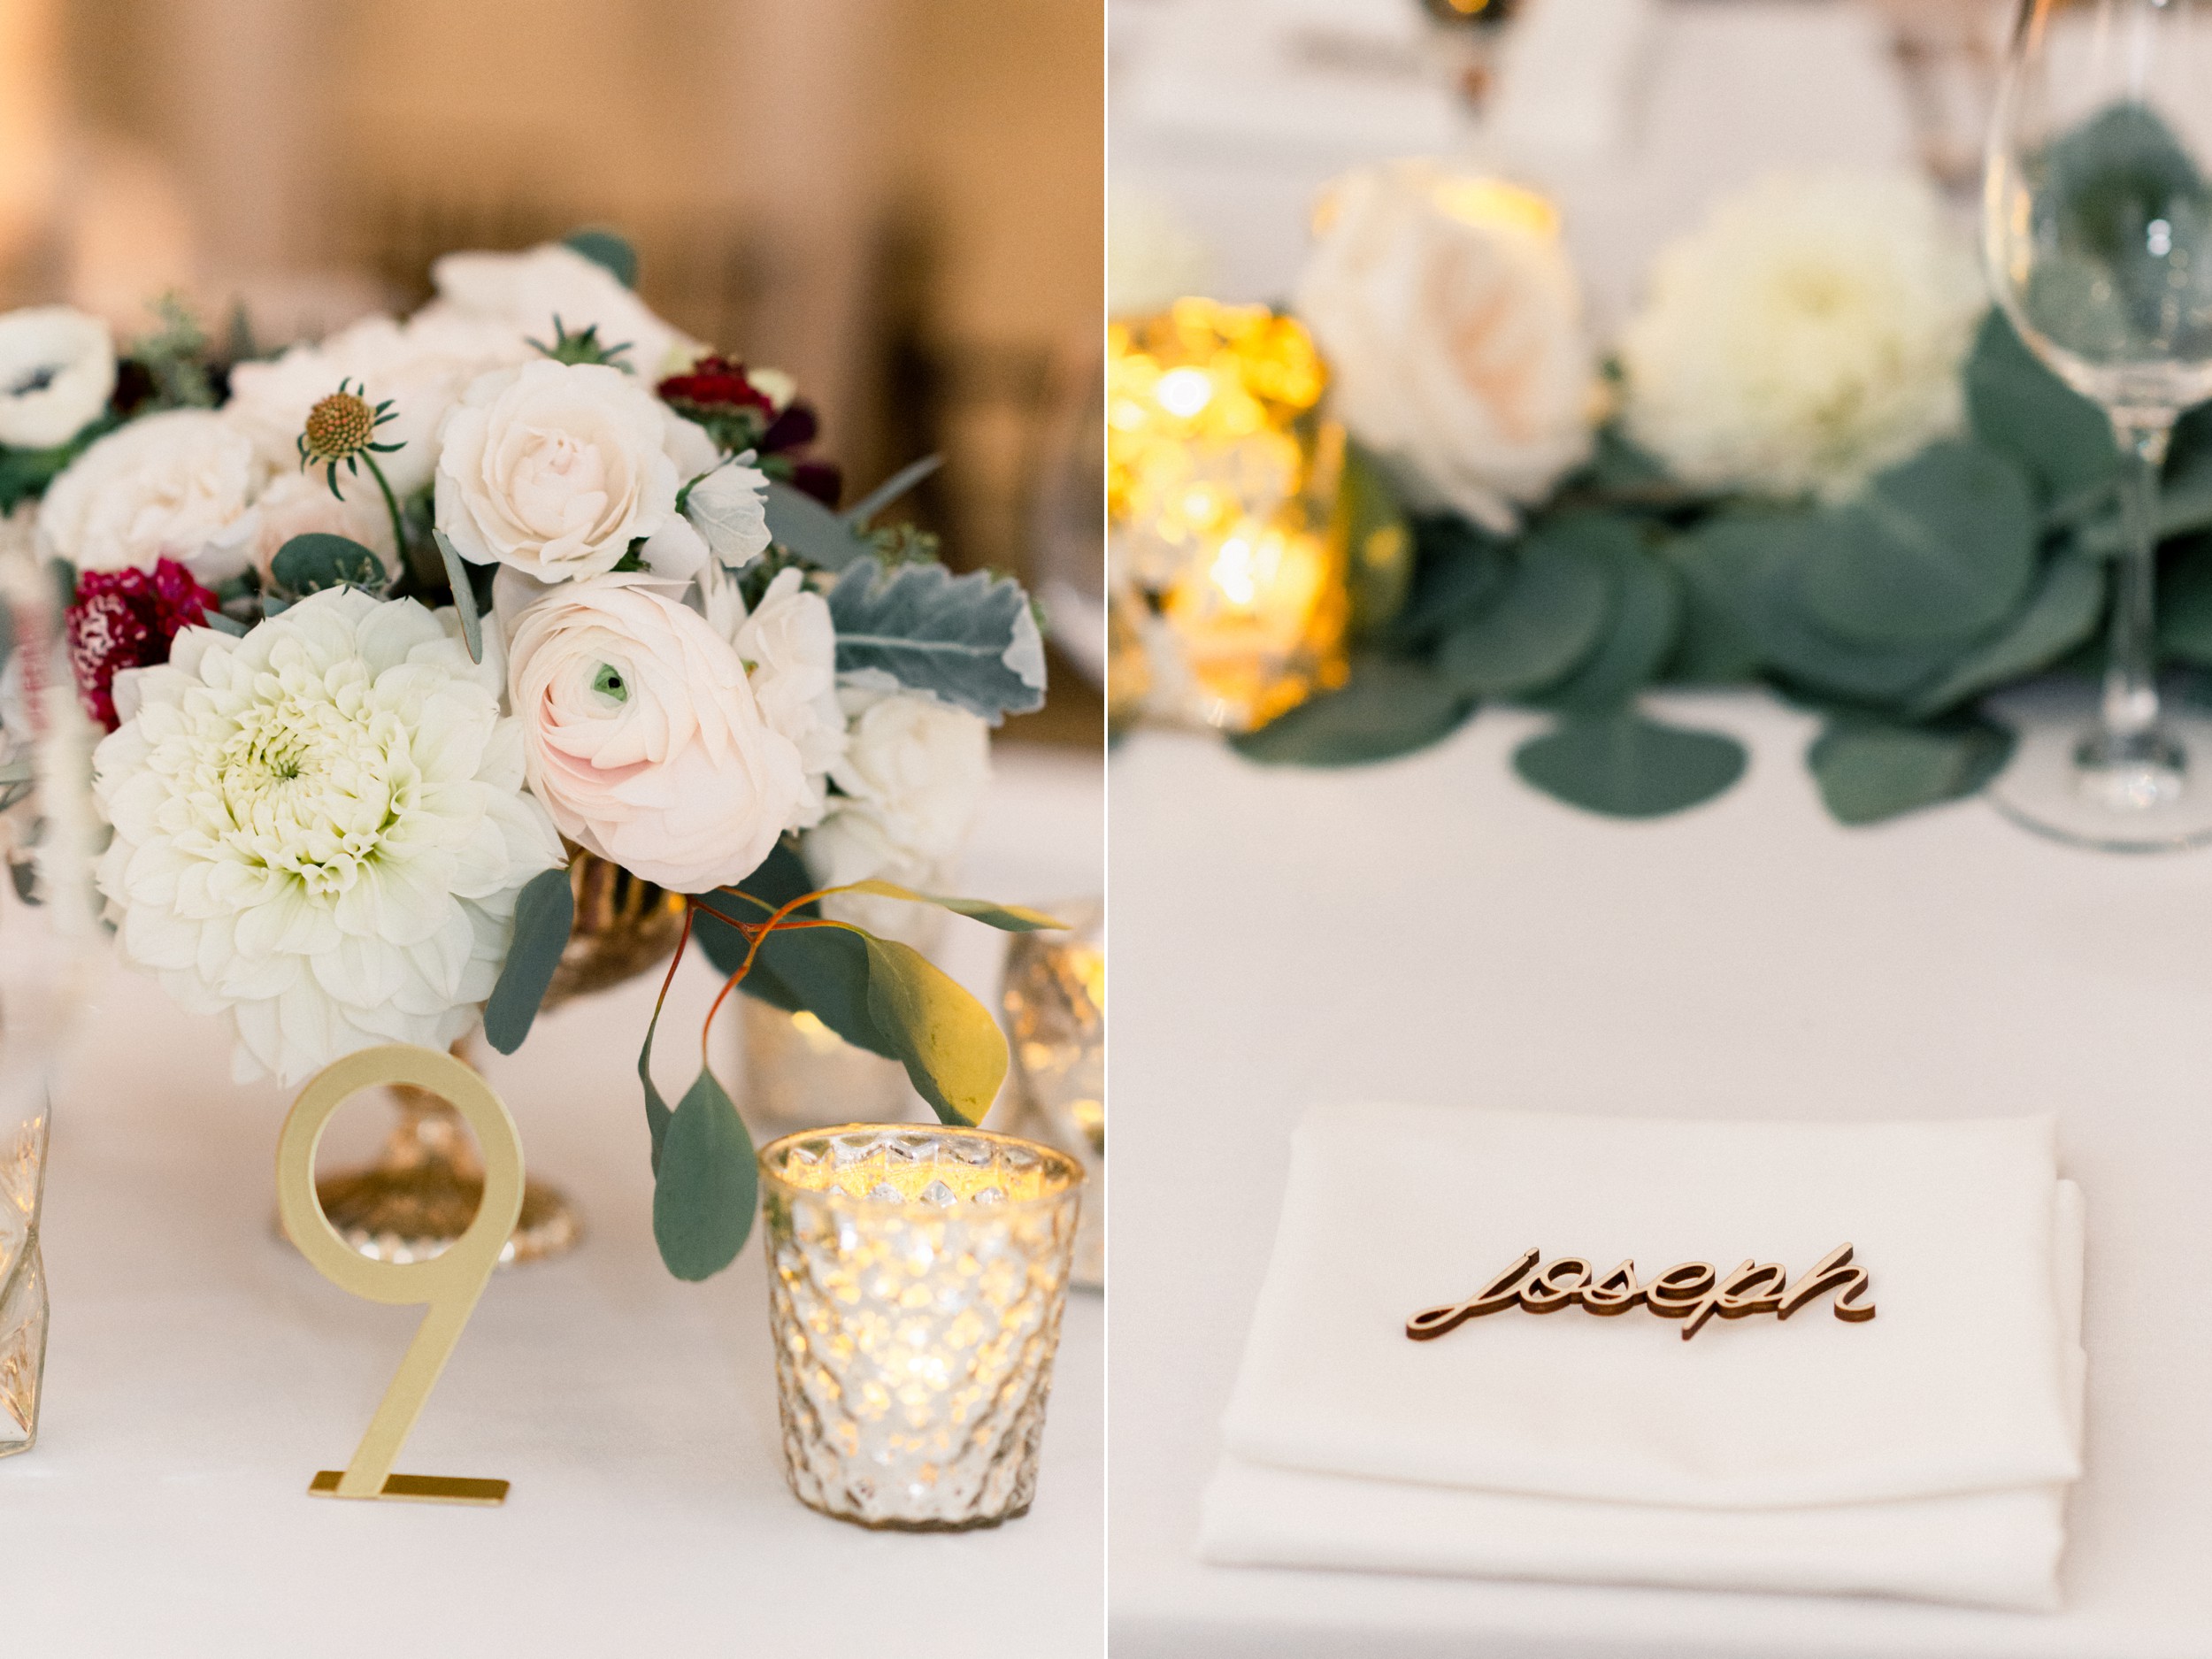 Harvard Art Museum wedding reception with wooden cut-out name plate for the bride and bridal party and modern gold table numbers